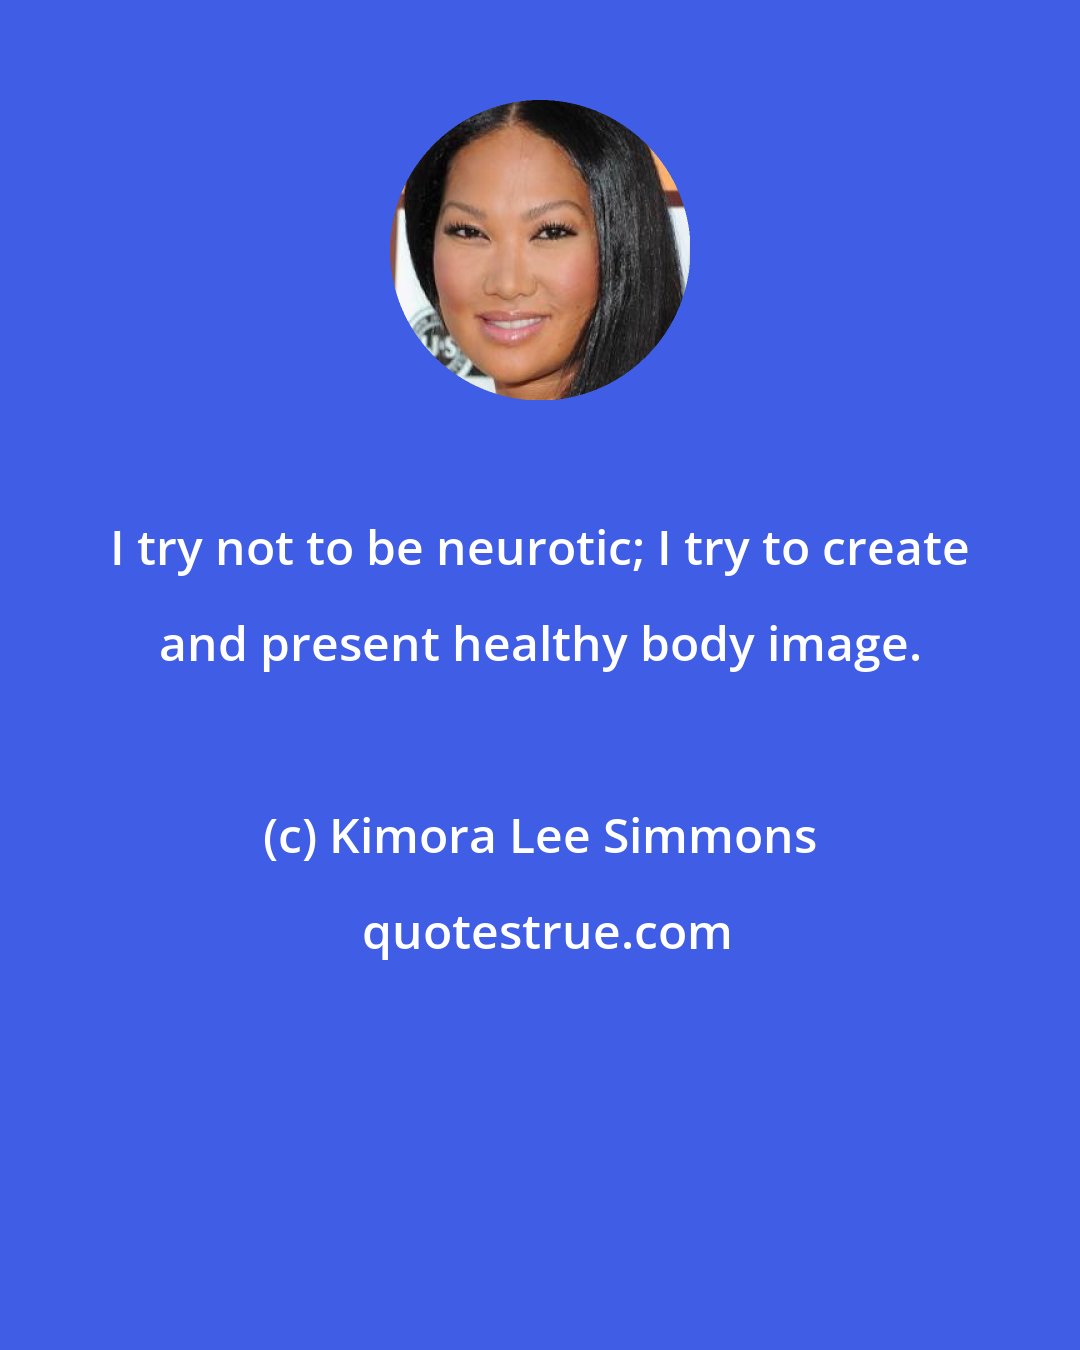 Kimora Lee Simmons: I try not to be neurotic; I try to create and present healthy body image.